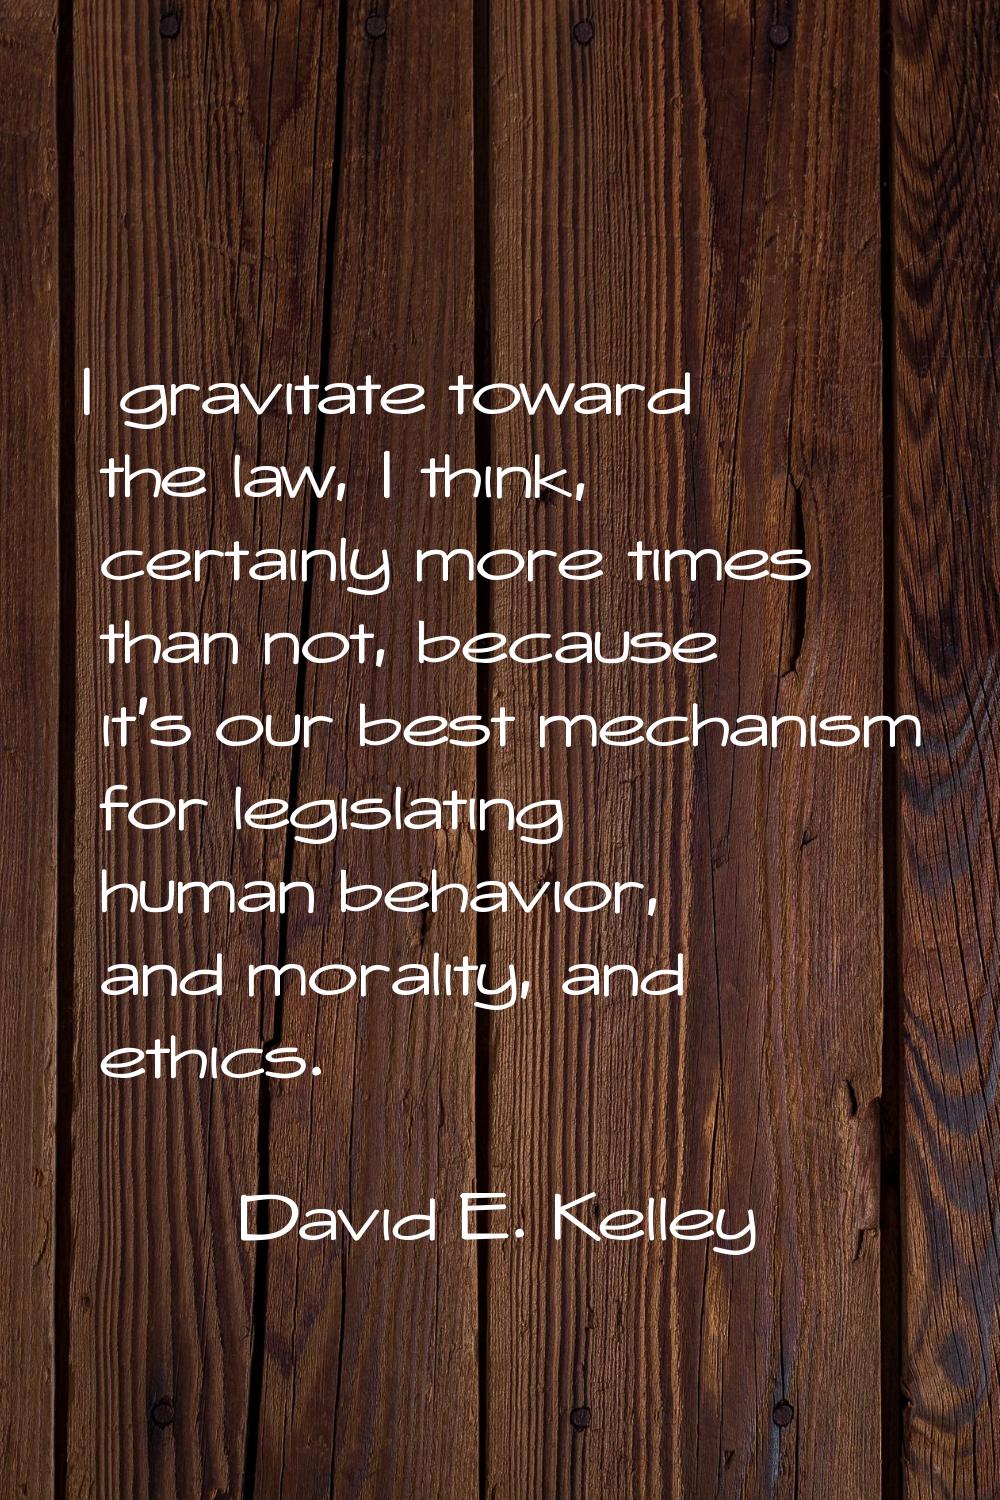 I gravitate toward the law, I think, certainly more times than not, because it's our best mechanism